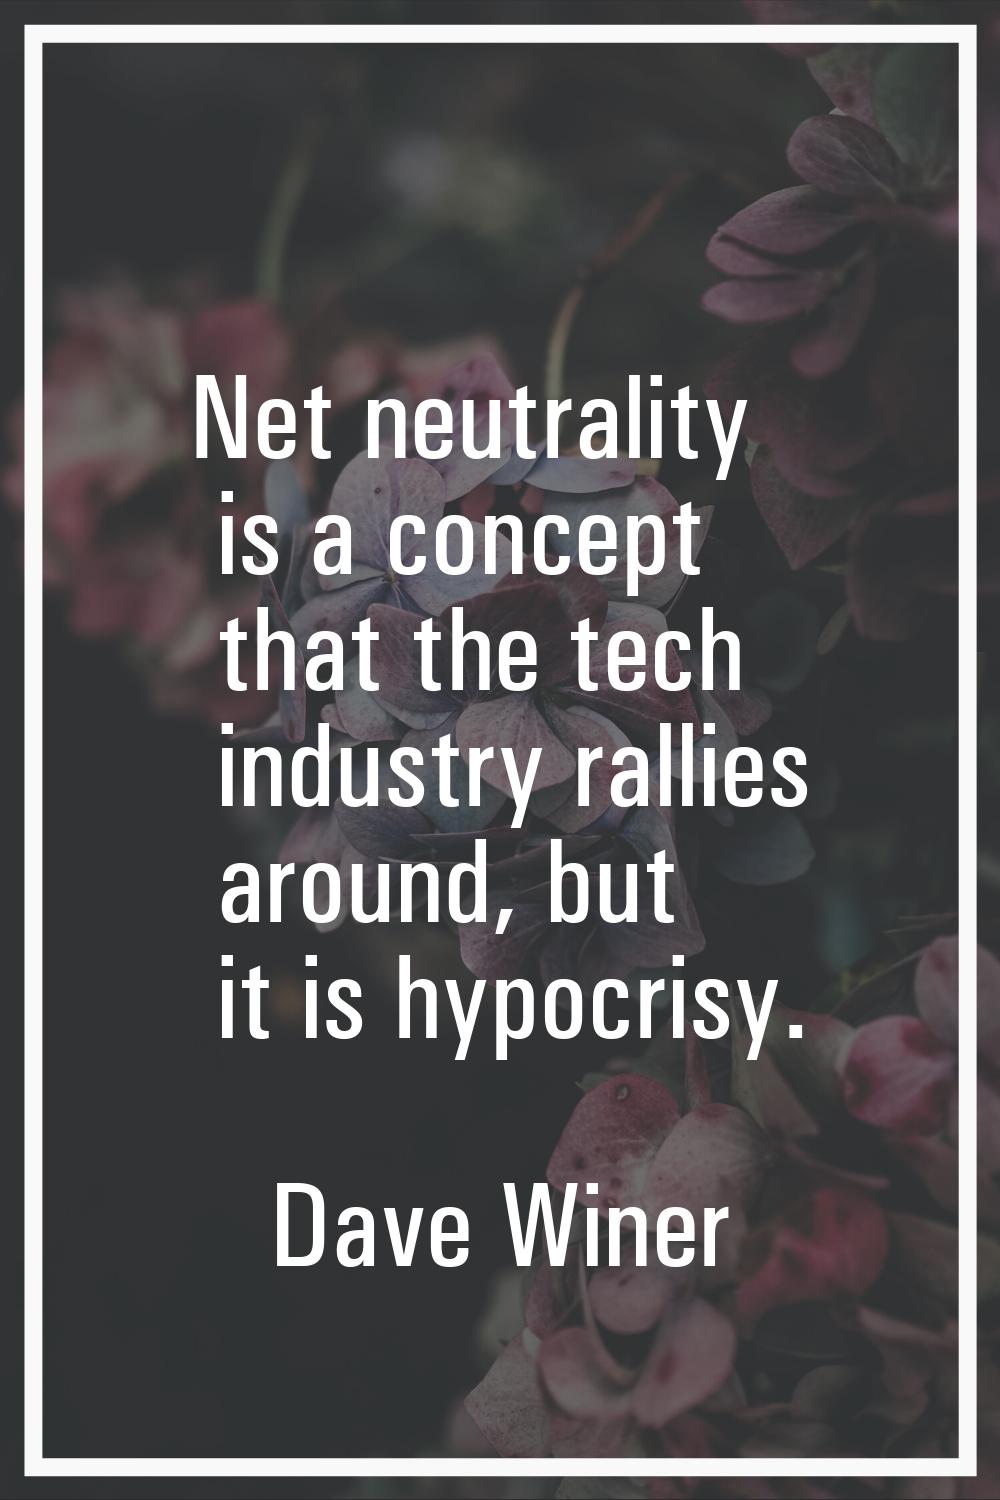 Net neutrality is a concept that the tech industry rallies around, but it is hypocrisy.